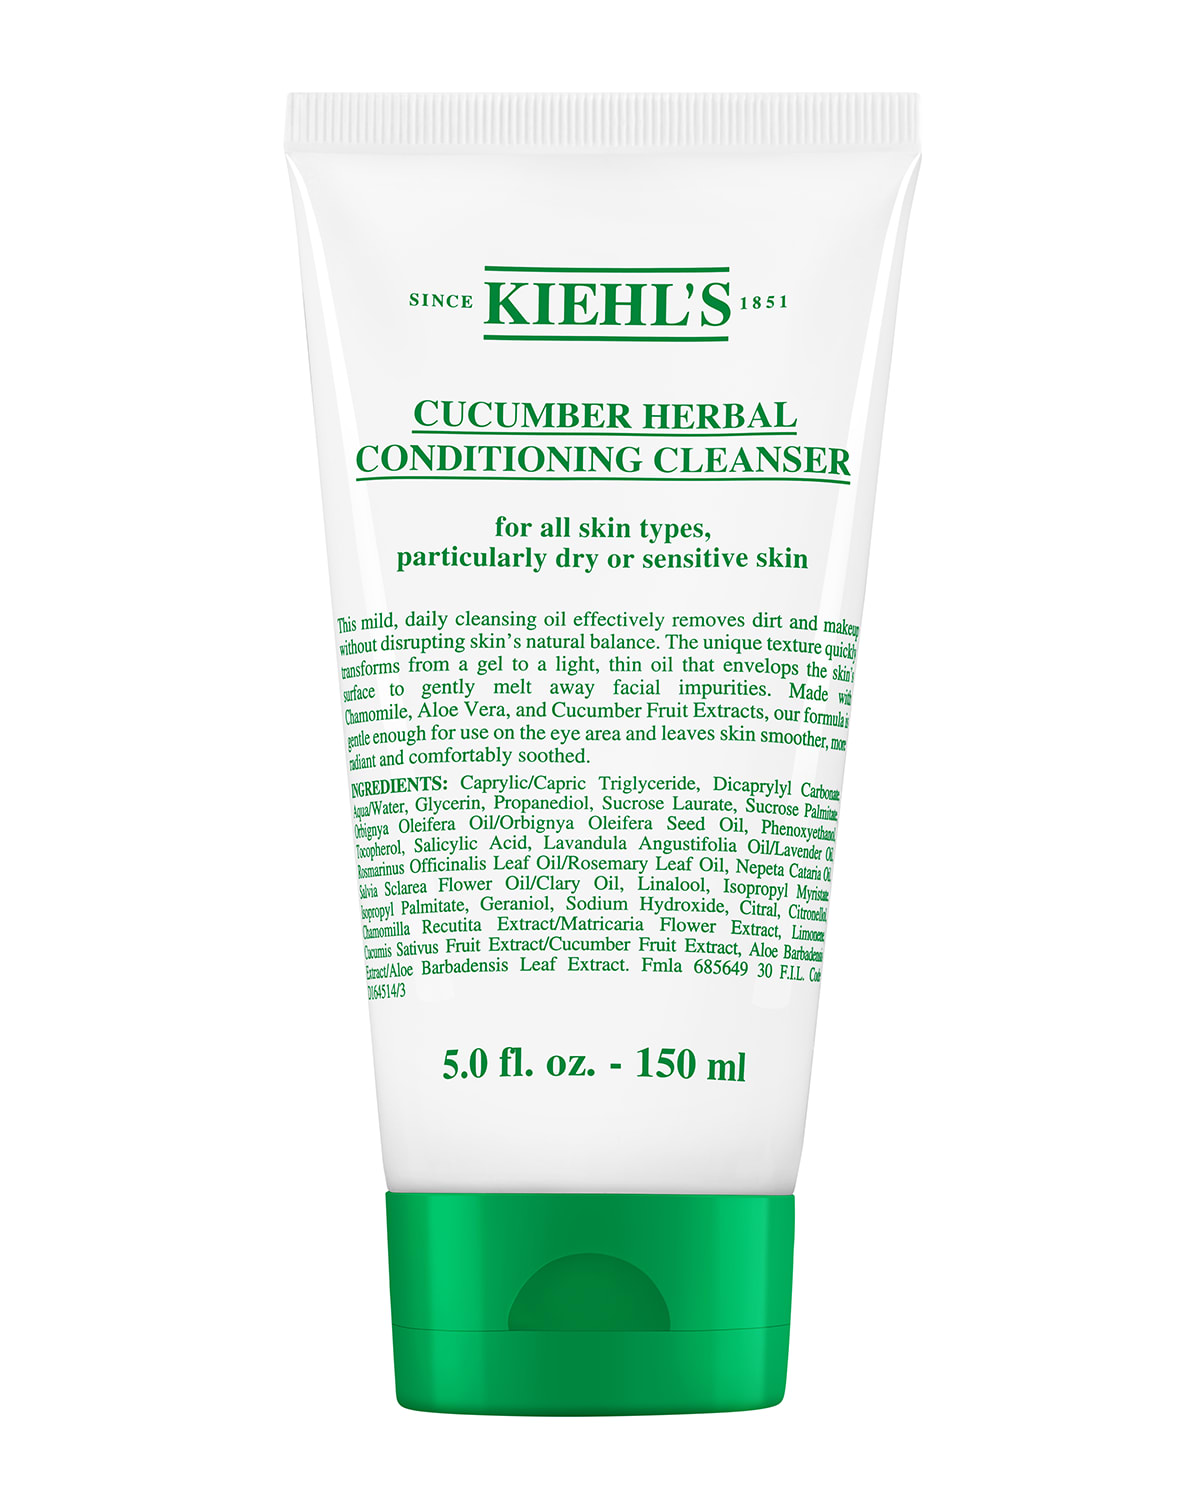 Cucumber Herbal Conditioning Cleanser, 11.7 oz.